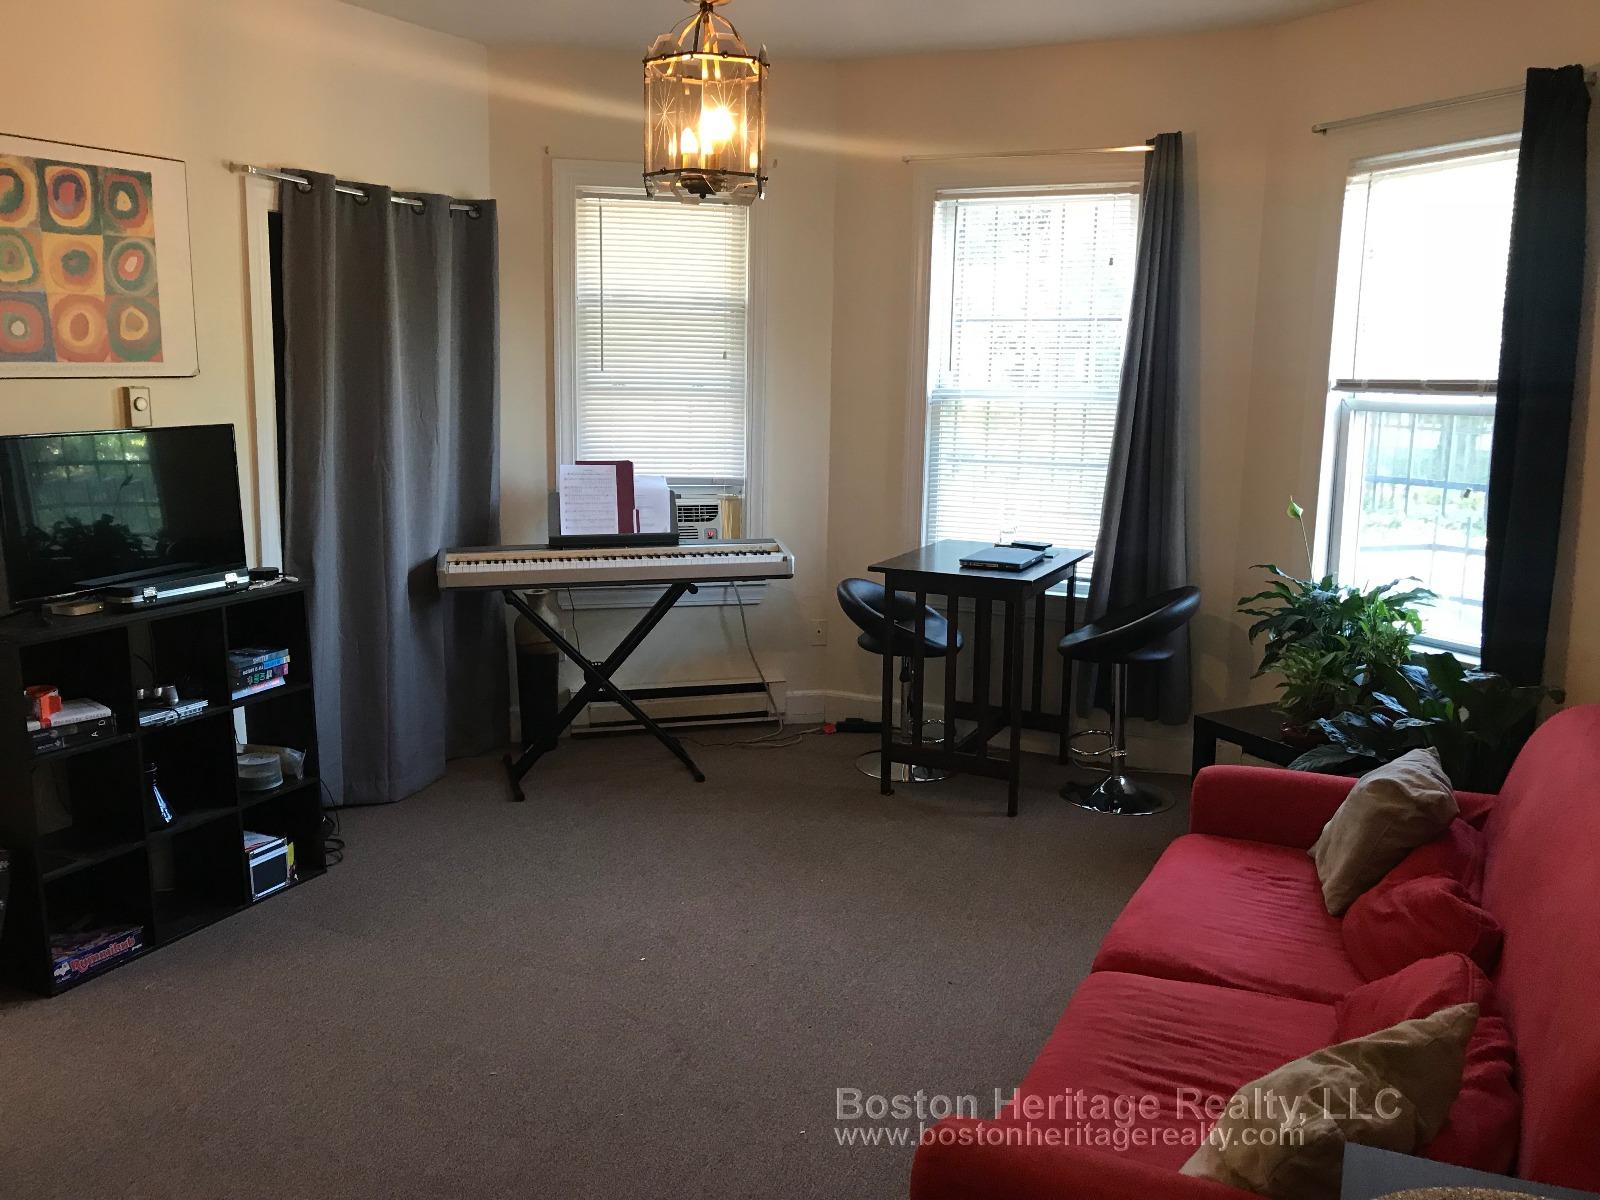 1 Bed, 1 Bath apartment in Boston, Mission Hill for $1,950